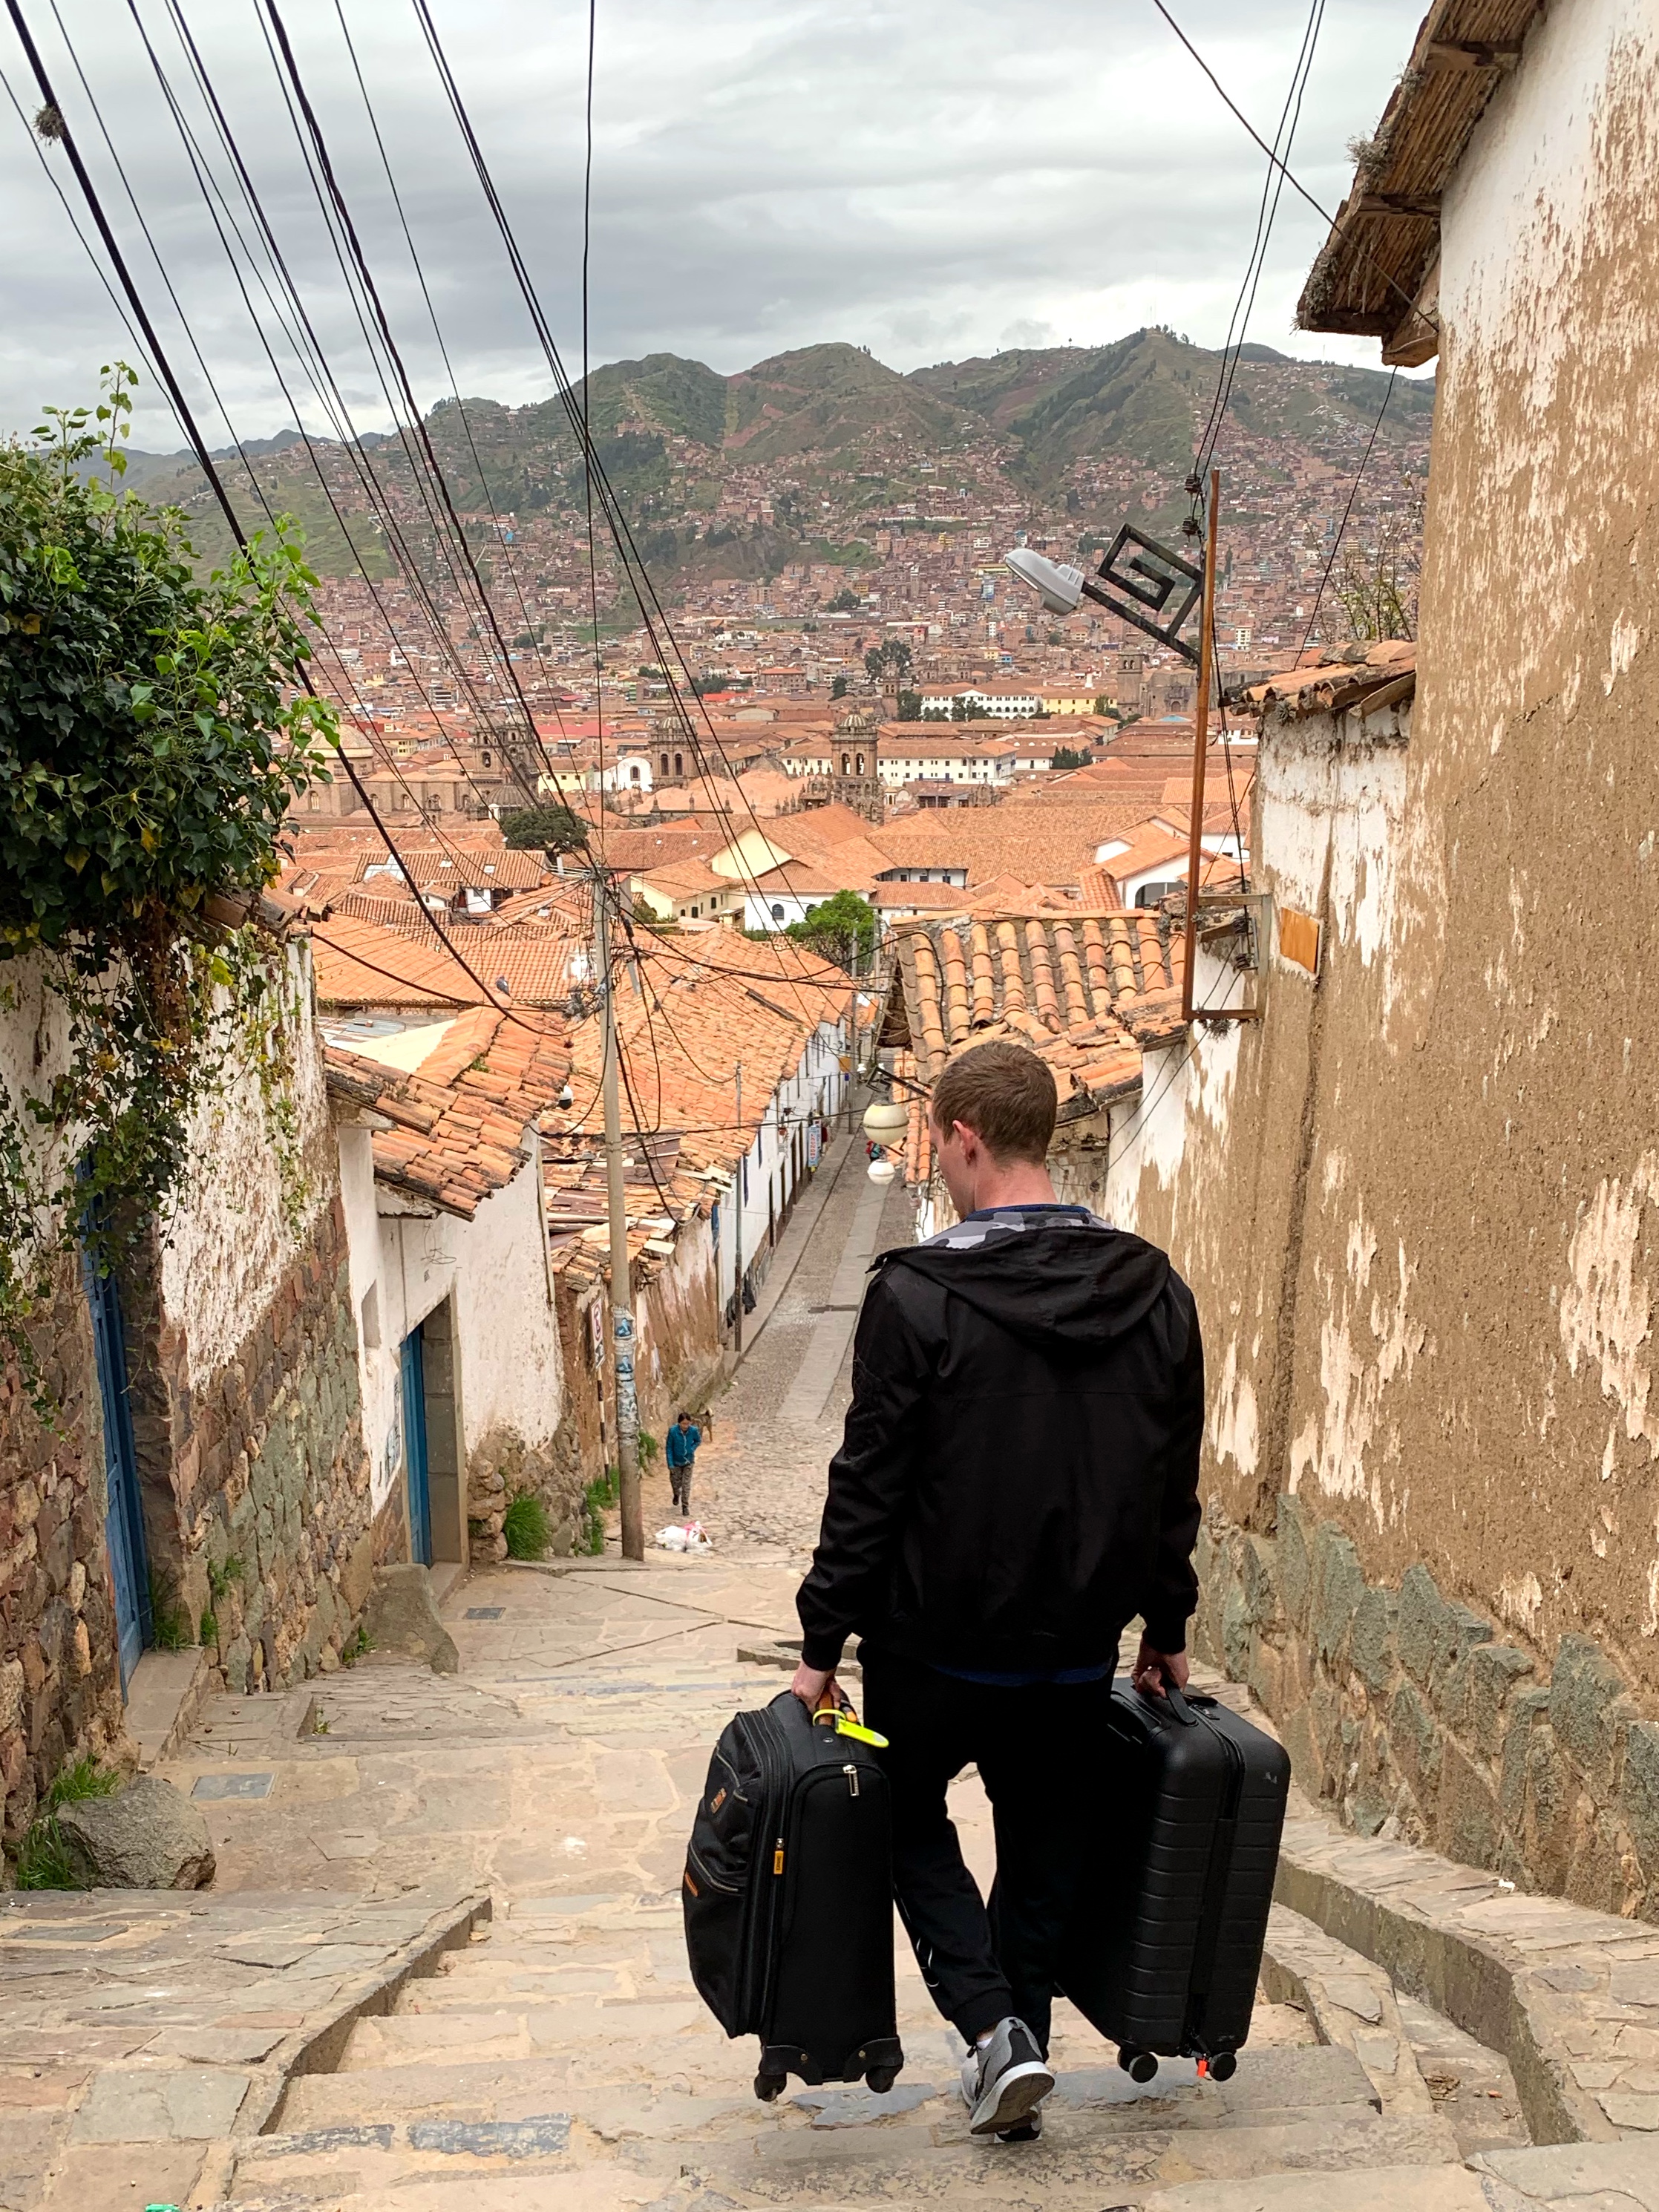 Mark carrying suitcases down the stairs of the San Blas neighborhood in Cusco, Peru